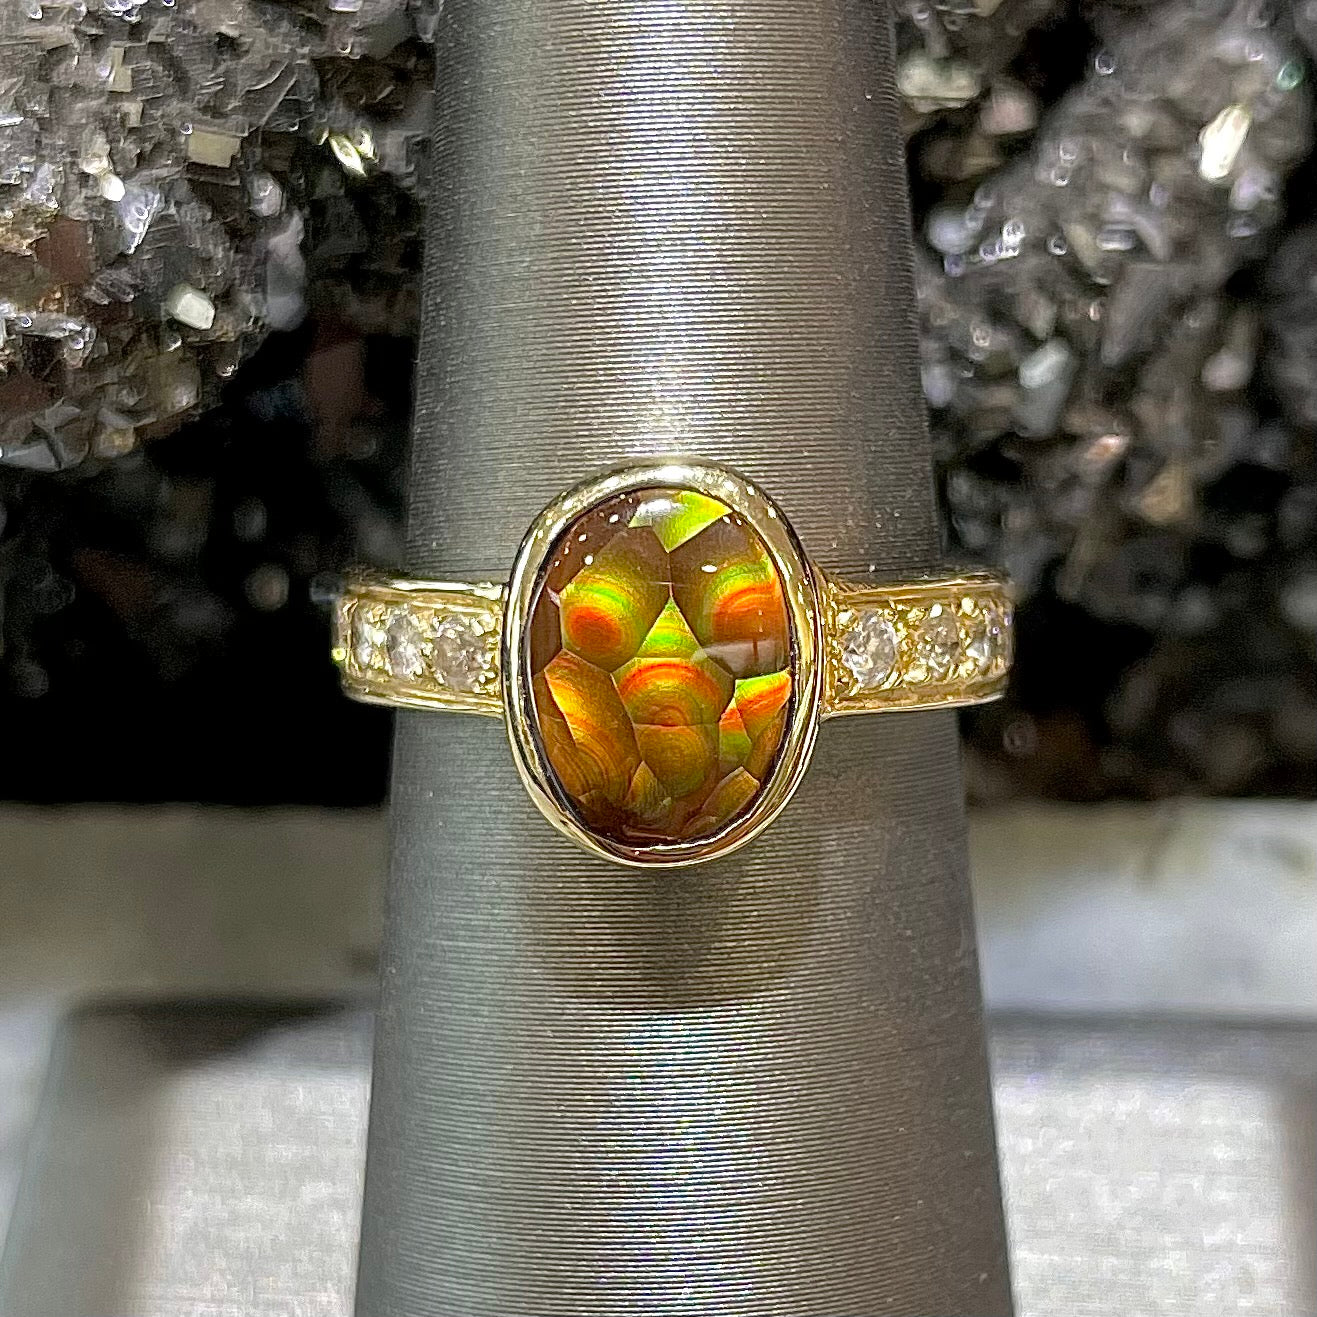 A custom ladies' fire agate bezel ring set in 14kt yellow gold with a single row of diamonds on each side.  The ring is on a ring holder against a black hematite crystal background.  The center fire agate has a brown body color with green and red spots and swirls.  The stone resembles a ladybug.